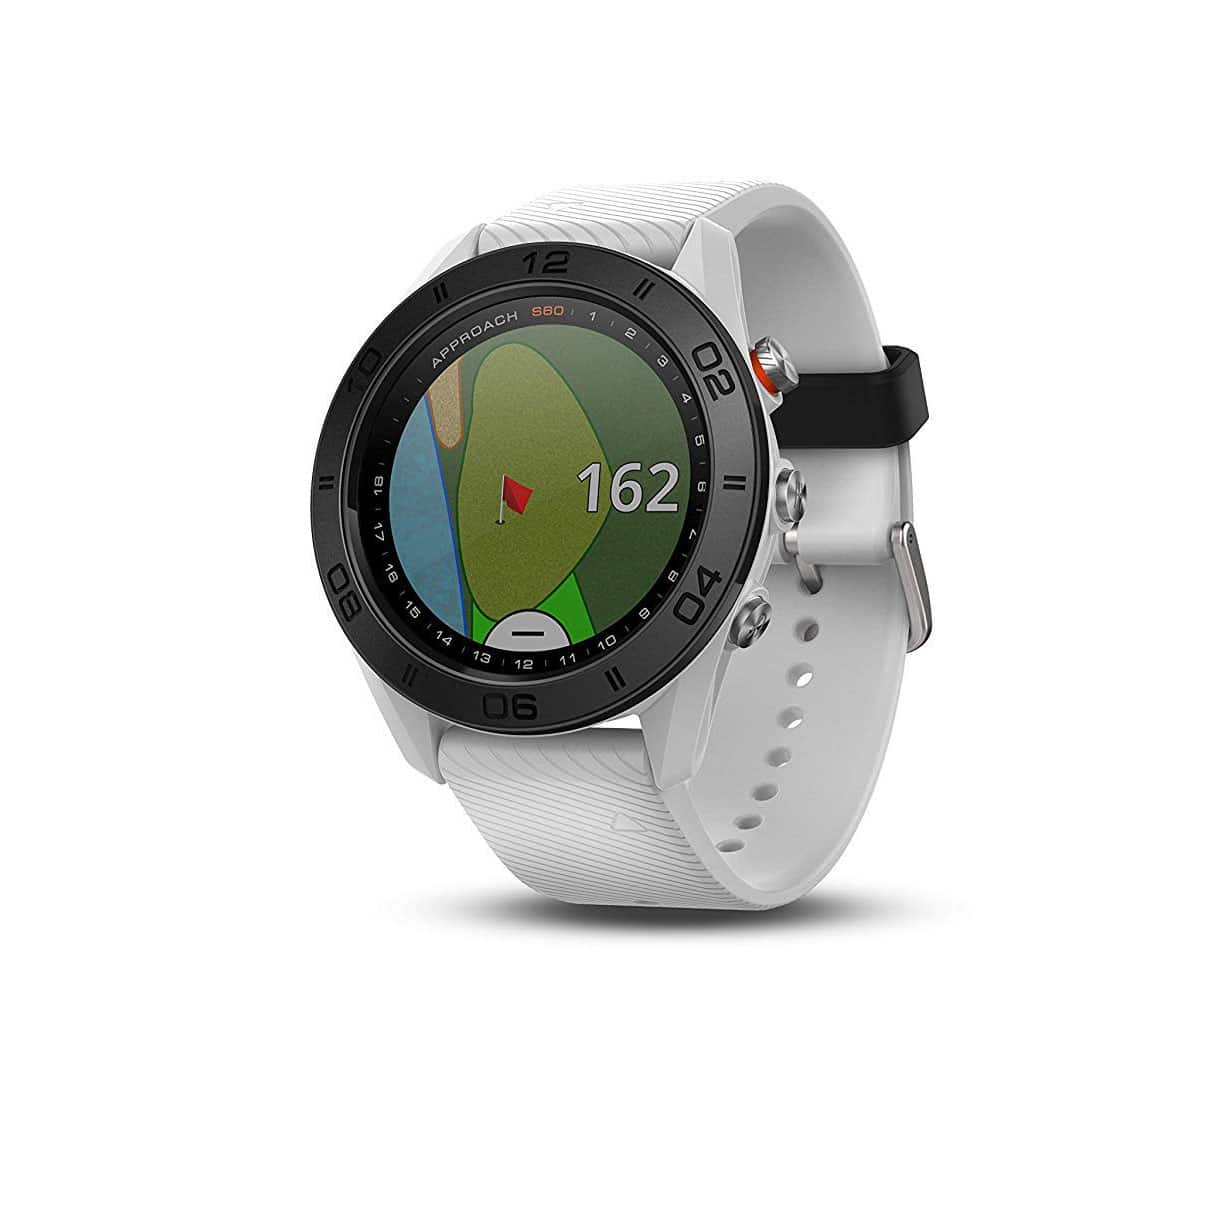 Top 10 Best GPS Navigation Watches in 2021 Reviews